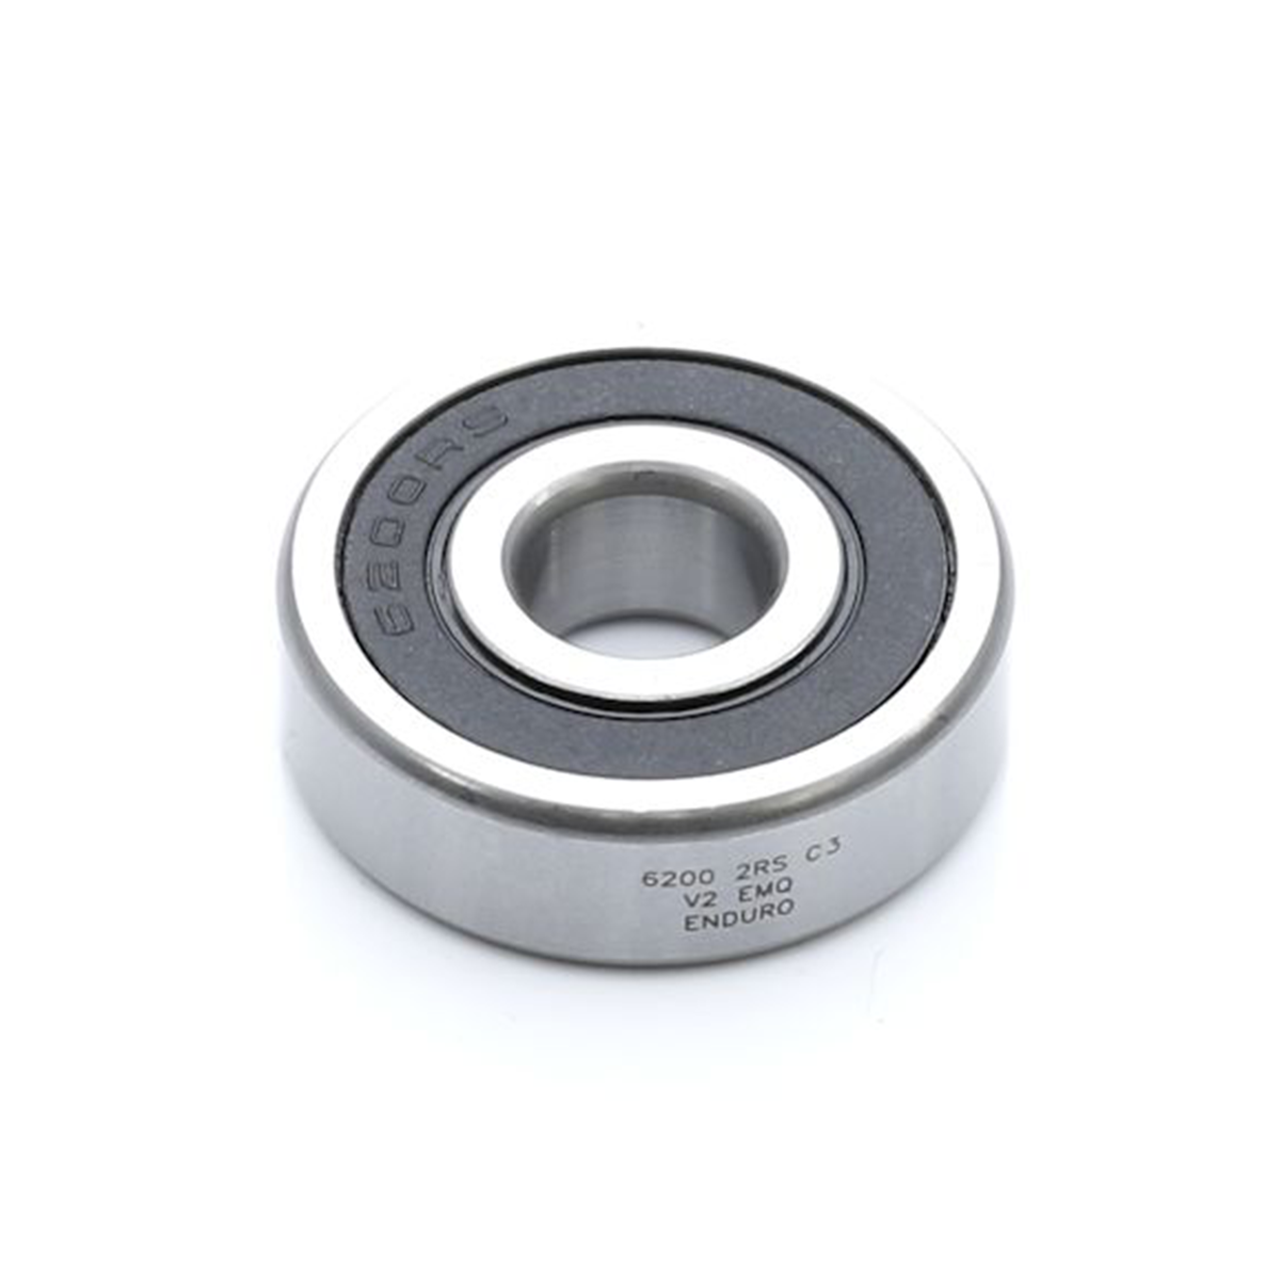 Enduro S6200 2RS/C3 - Stainless Steel Radial Bearing (C3 Clearance) - 10mm x 30mm x 9mm